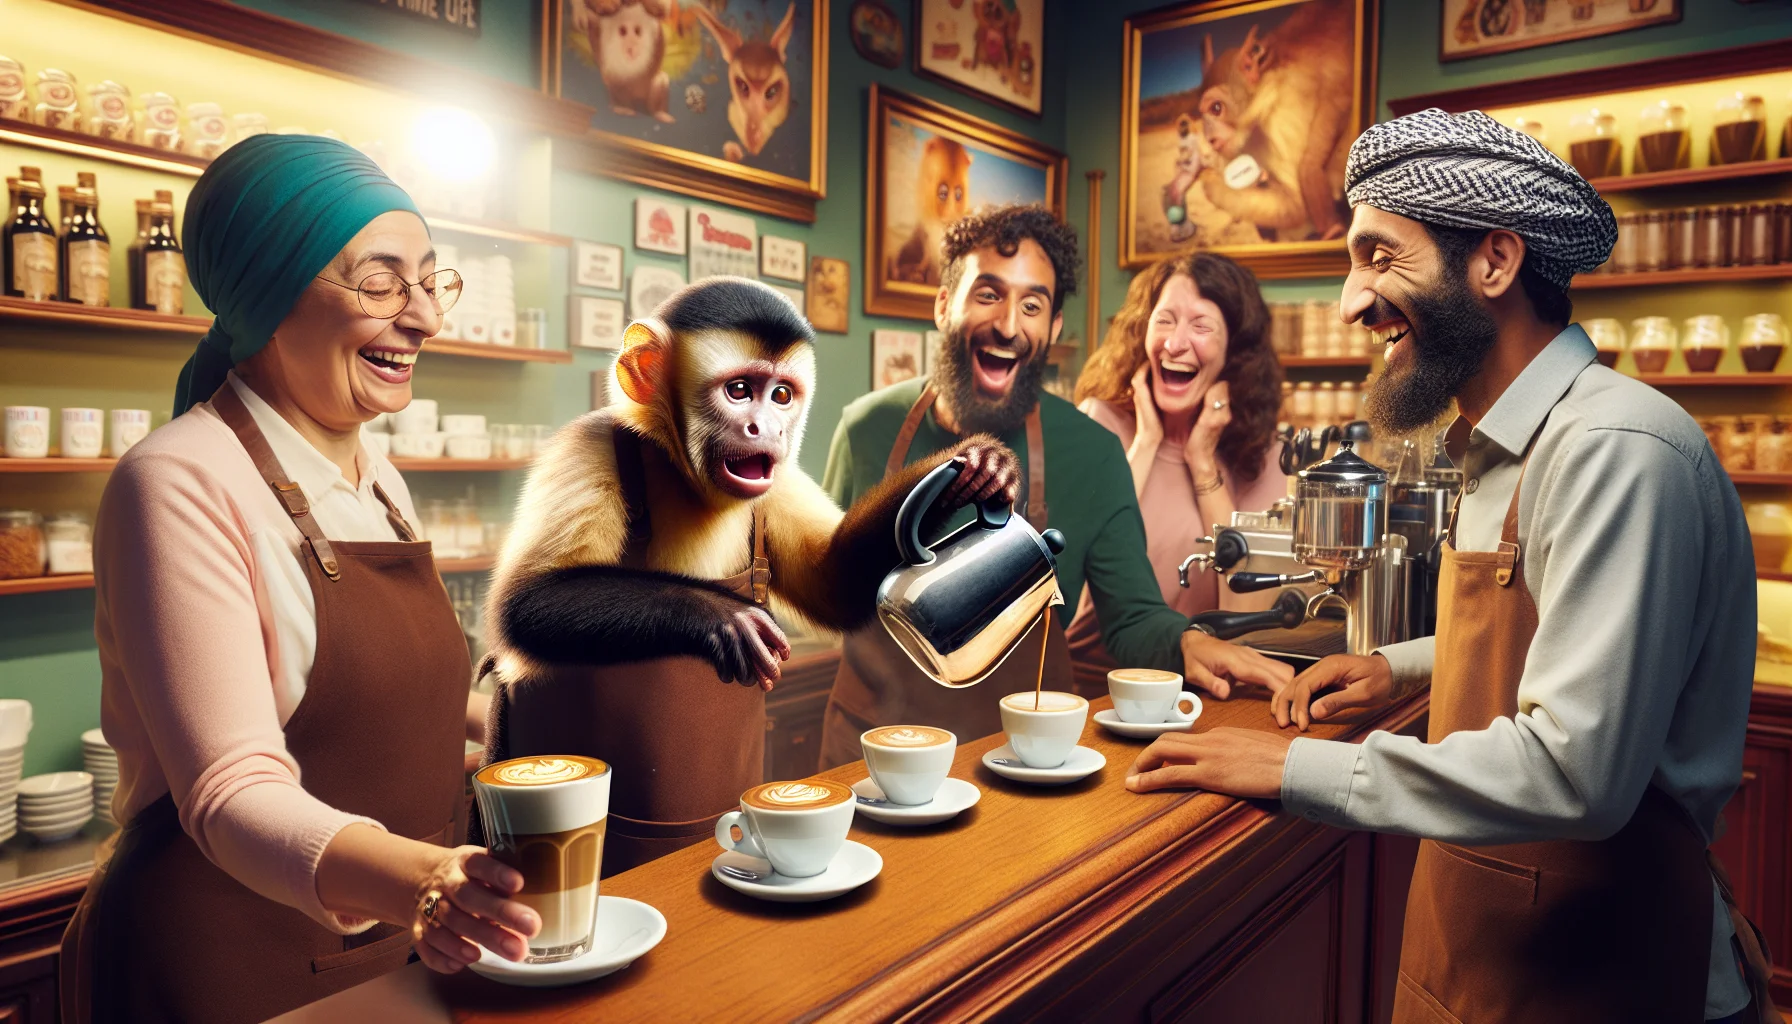 Imagine a humorous scene at an espresso cafe. A capuchin monkey clad in a barista apron is standing behind the counter, expertly pouring a latte. The astonished customers, a diverse group of people including a Middle-Eastern woman, a Caucasian man, a Hispanic man and an African man, are laughing and taking pictures as they receive their expertly made coffees from the monkey barista. The warm, rich hues of the coffee and sparkles in the customers' eyes emphasize the inviting atmosphere of the shop. The walls, decorated with comical posters, add to the light-hearted ambiance.